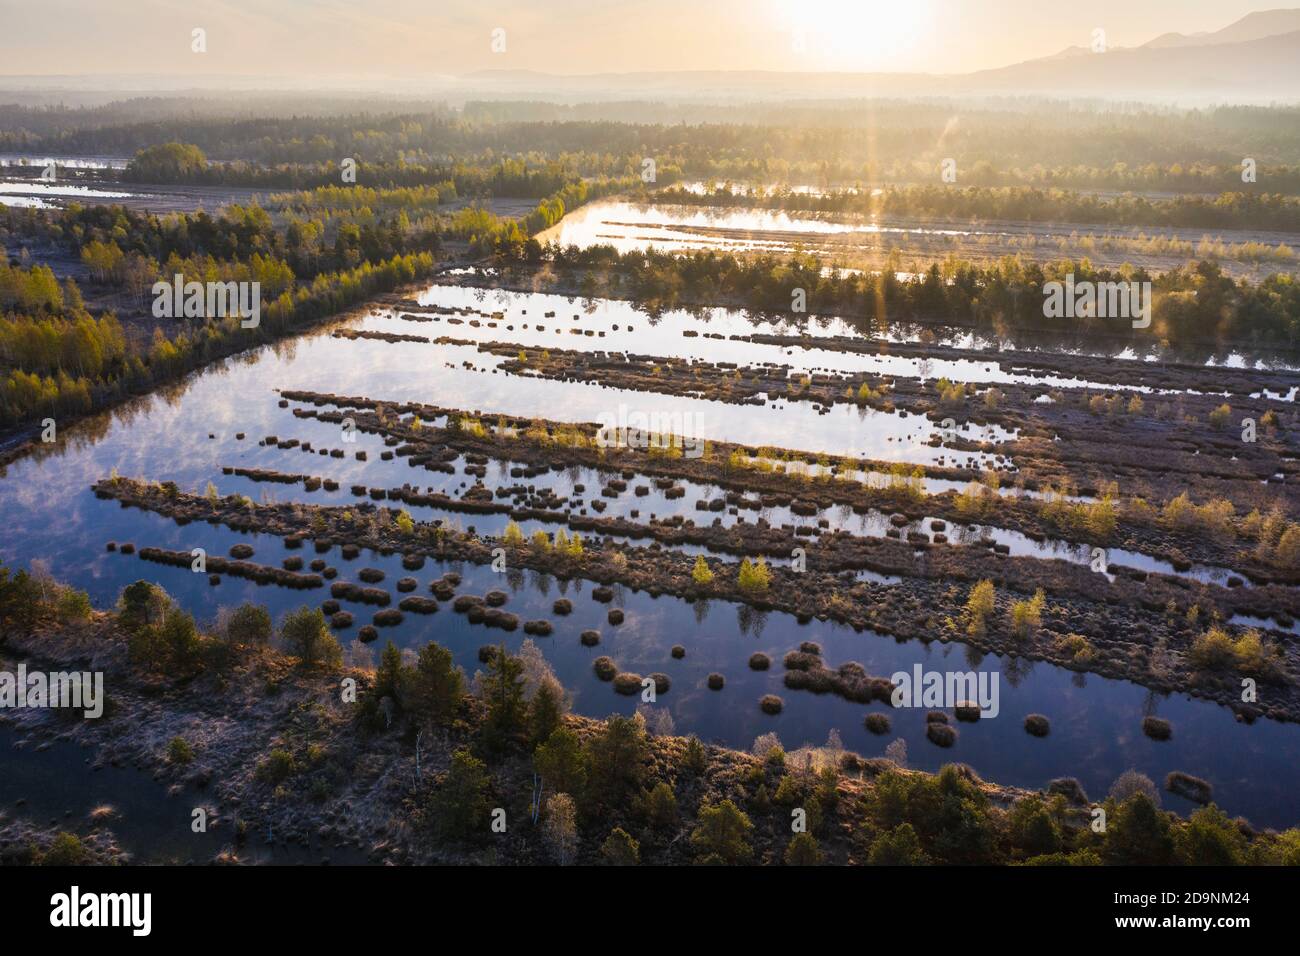 Wet peat extraction area, peatland renaturation between Raubling and Bad Feilnbach, Kollerfilze, aerial view, Upper Bavaria, Bavaria, Germany Stock Photo